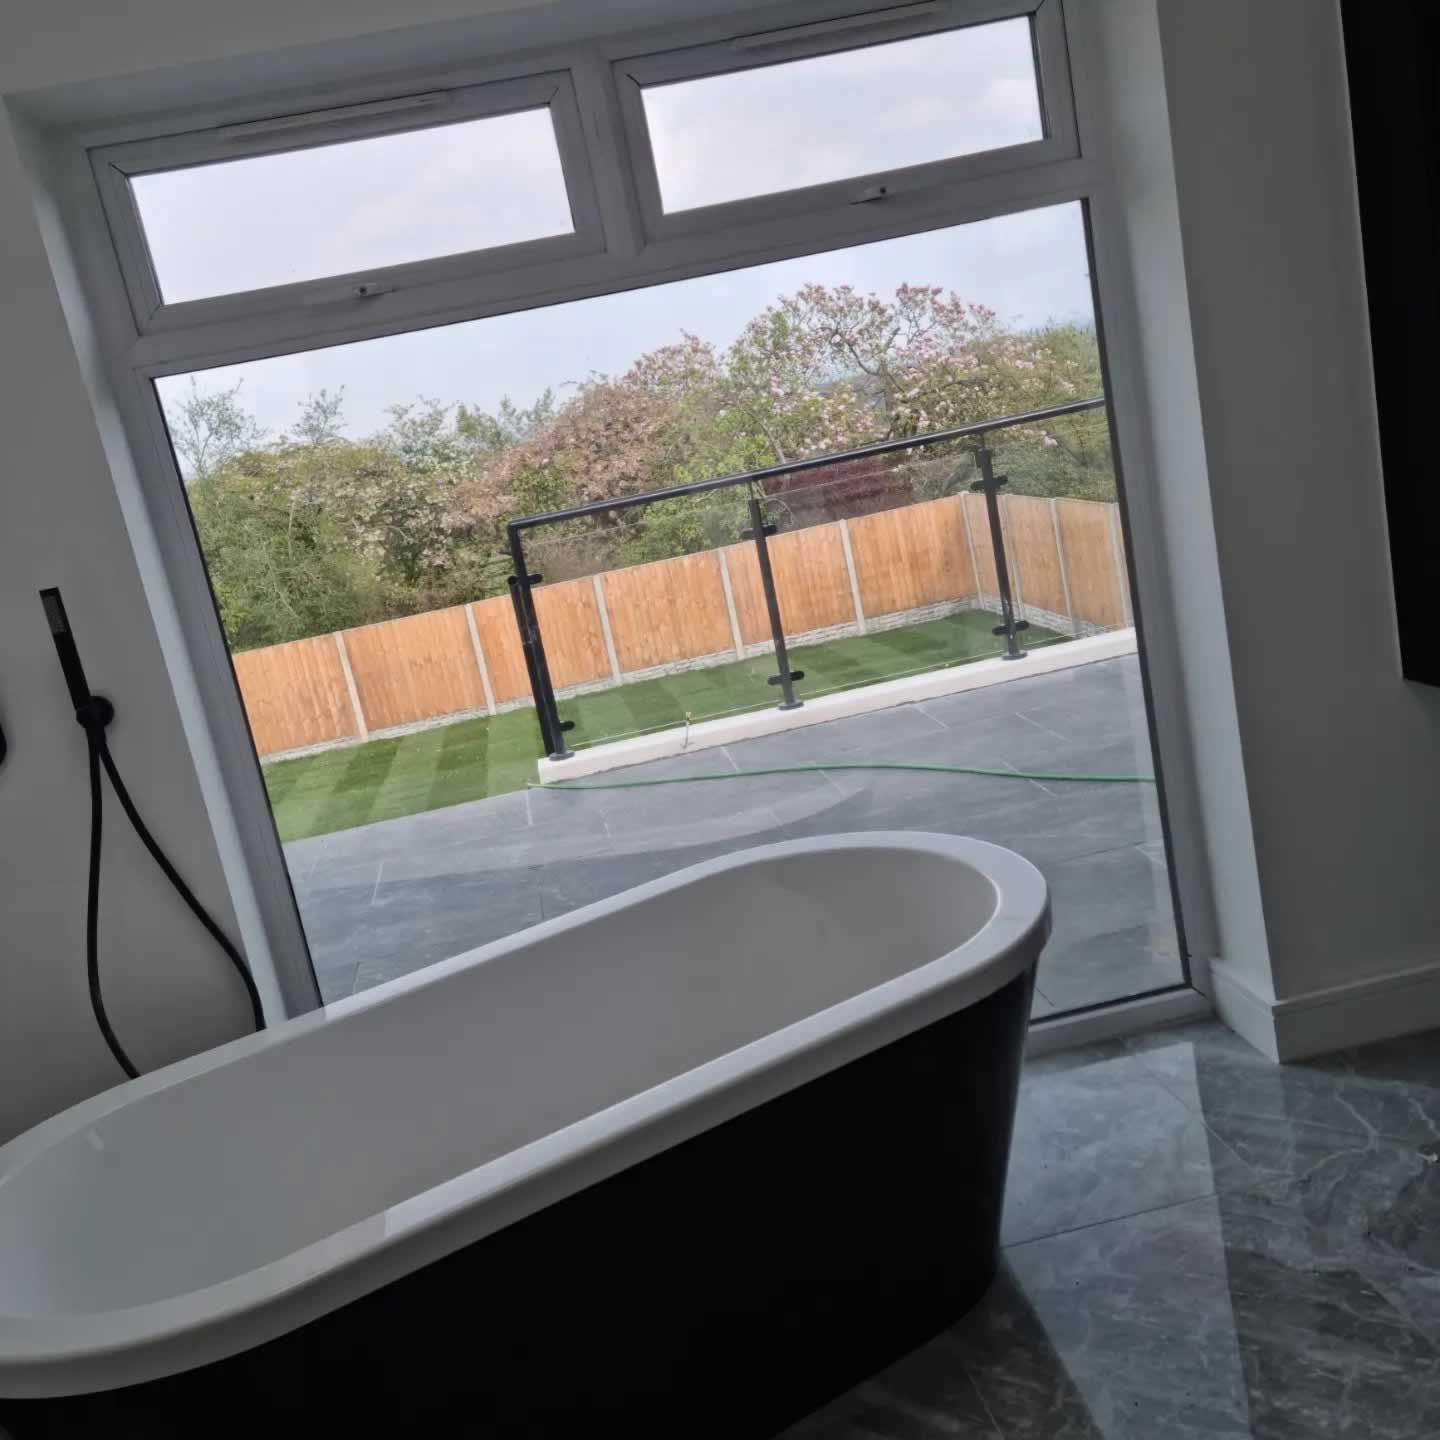 Privacy Window Film Professionally Installed